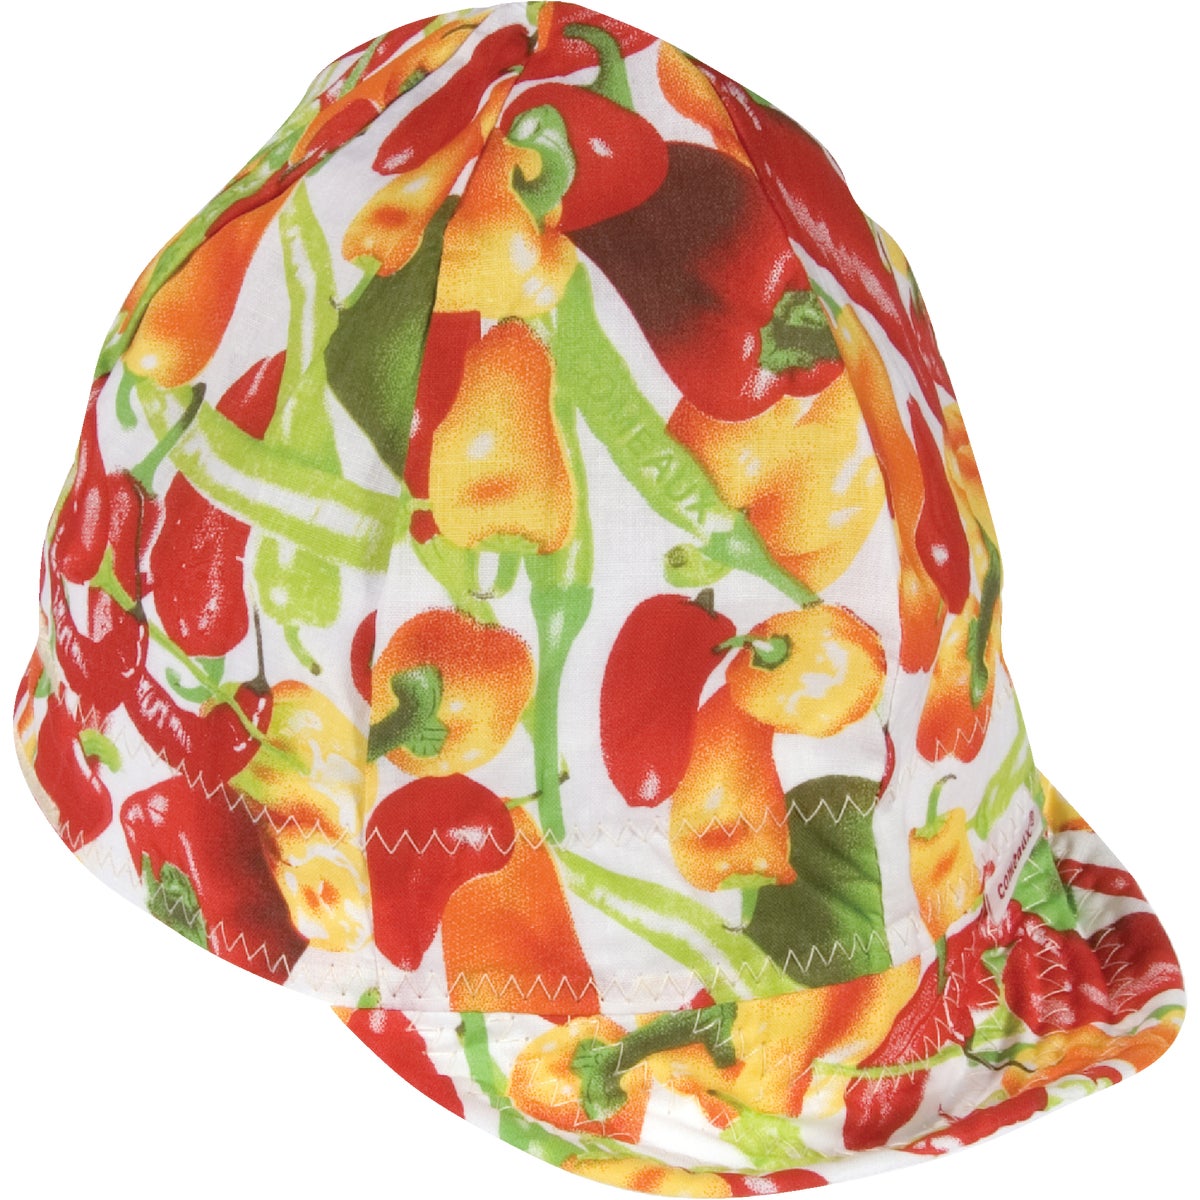 Forney 55815 Forney Size 7-1/8 Multi-Colored Welding Cap 55815